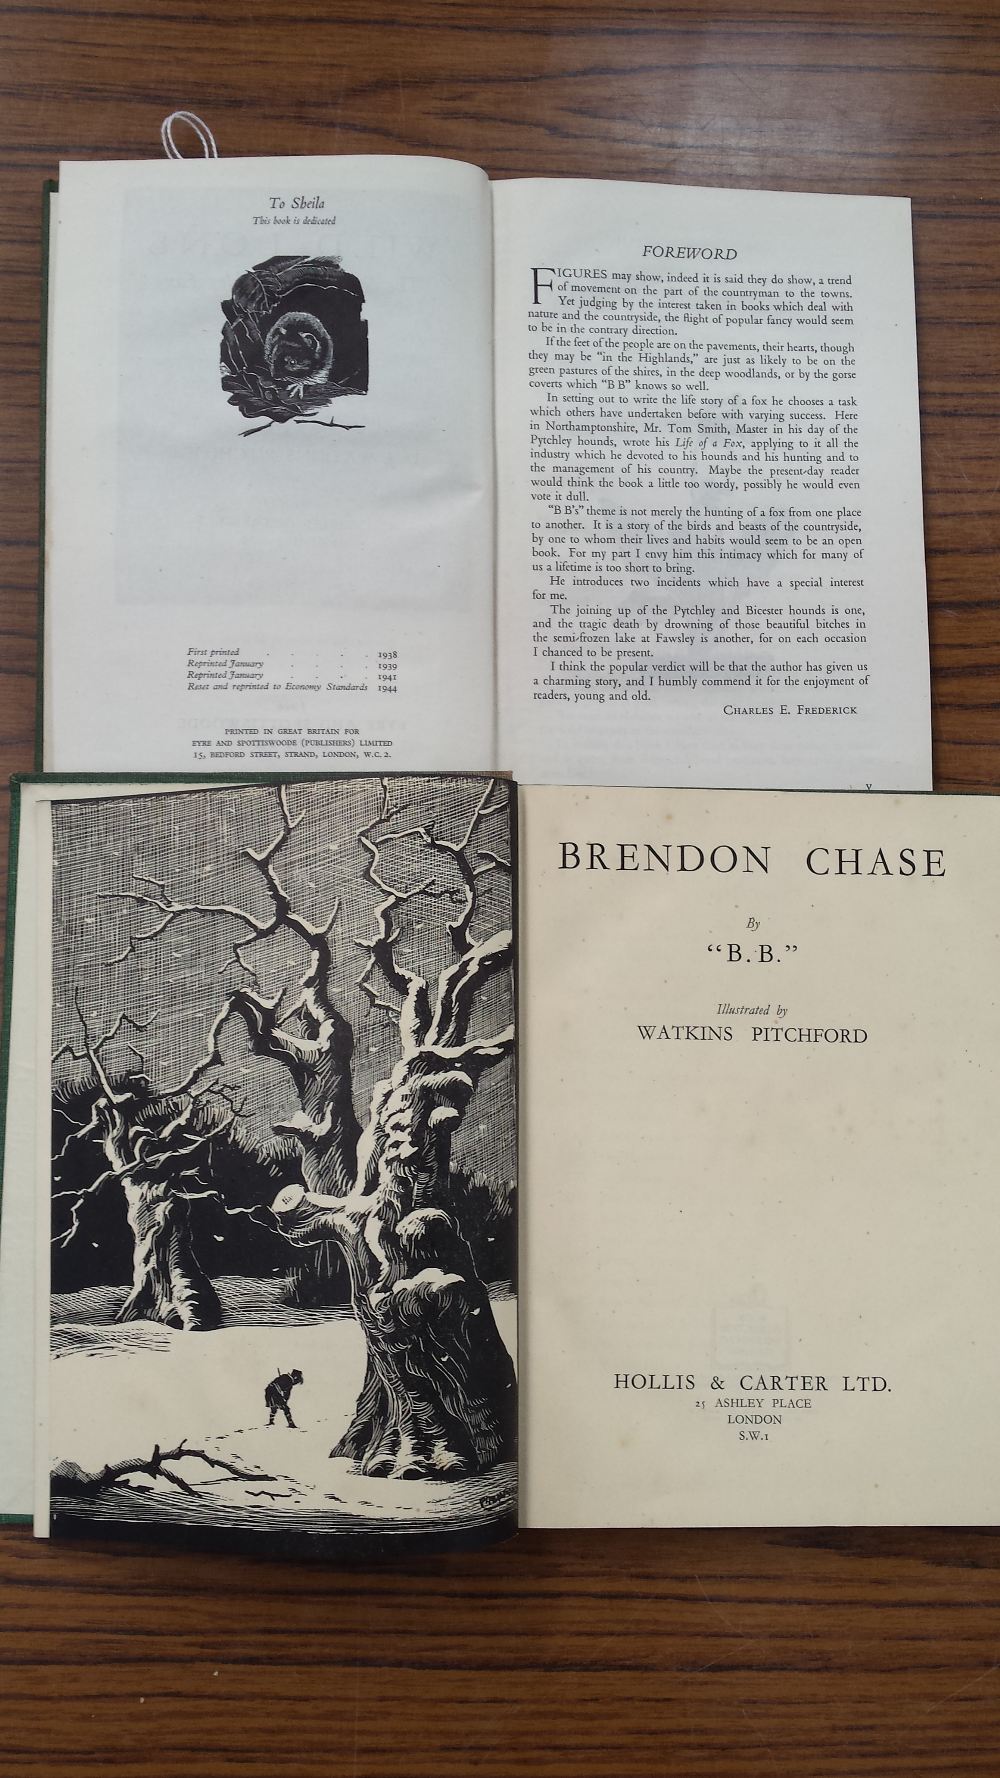 Denys Watkins-Pitchford (BB). 'Wild Love' London 1944 and 'Brendon Chase', London 1944, First